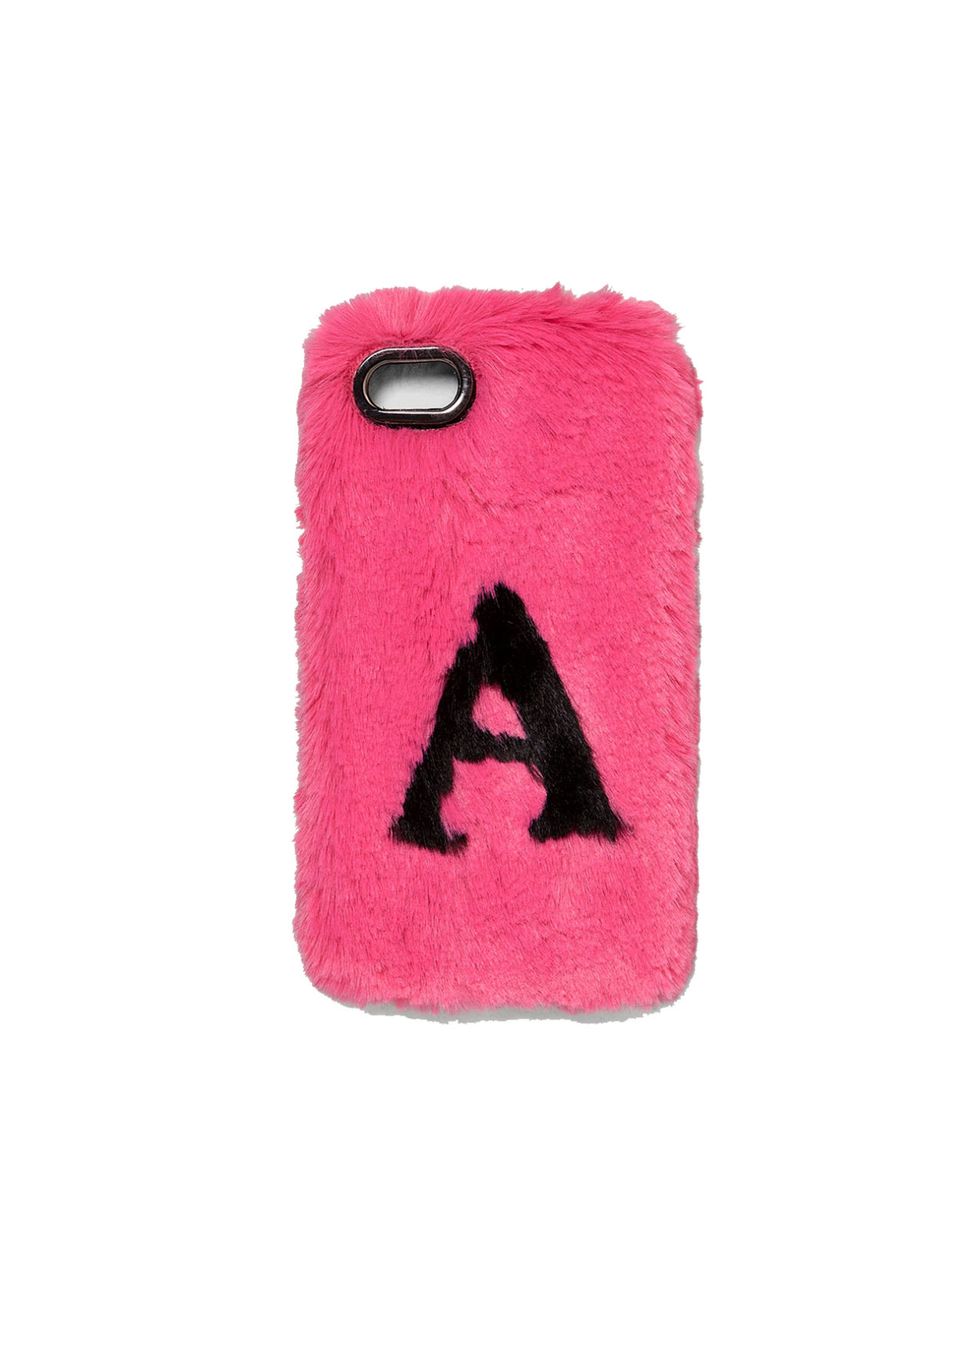 Mobile phone case, Pink, Font, Technology, Mobile phone accessories, Electronic device, Triangle, Magenta, 